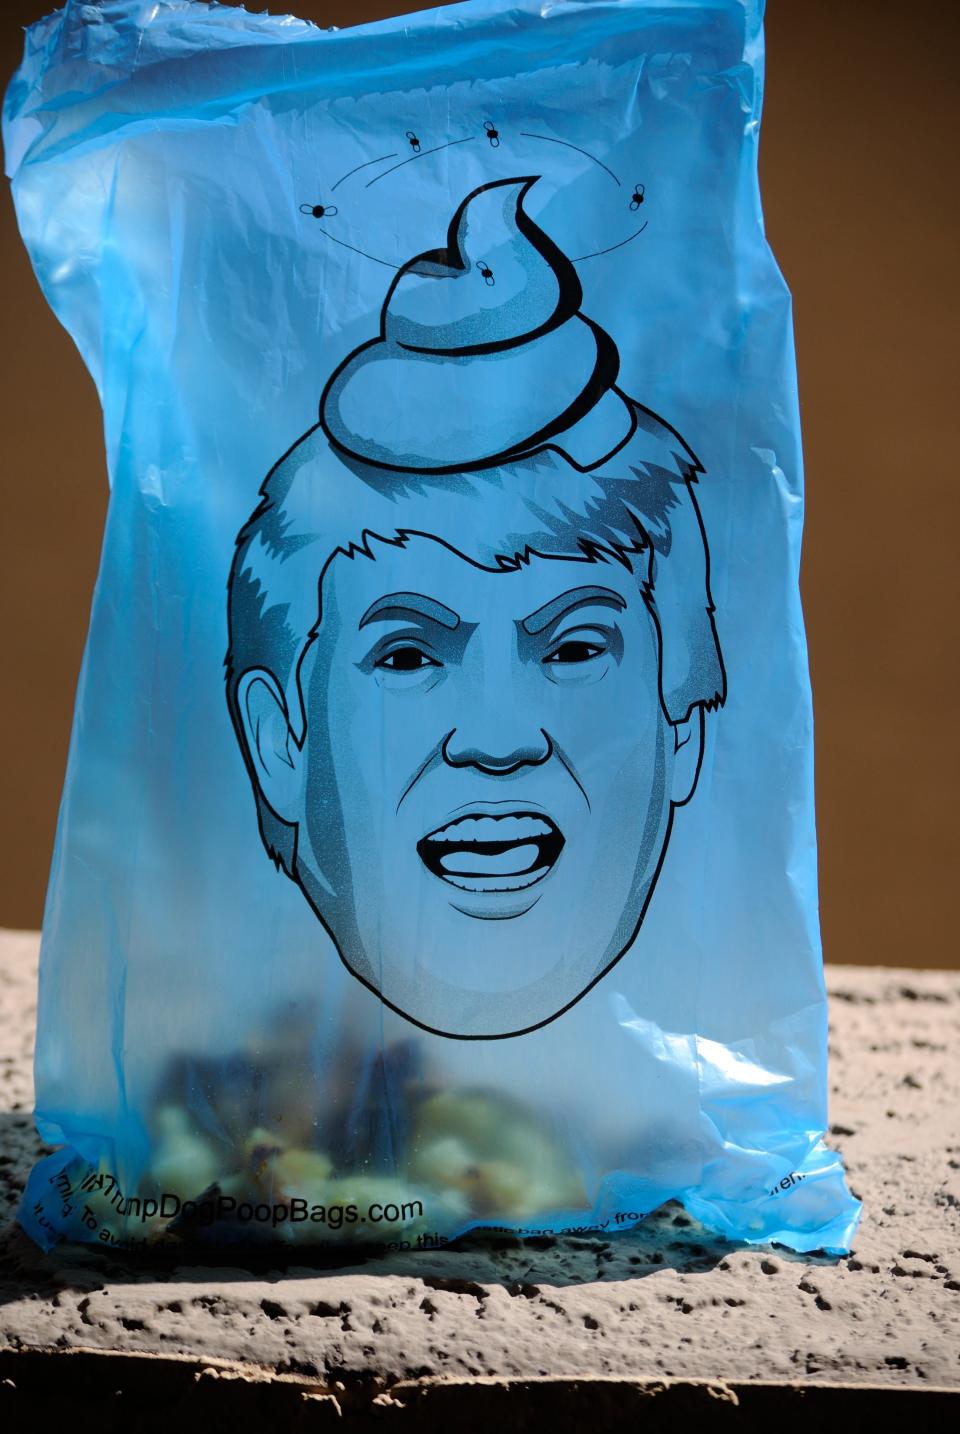 It's hard to tell what holds more crap: Donald Trump or this Trump-themed dog poop bag. Let's call it a draw, but we prefer the bag since we'll be able to get rid of it before November. (<a href="https://donaldtrumpdogpoopbags.com/" target="_blank">DonaldTrumpDogPoopBags.com</a>, $4.99)